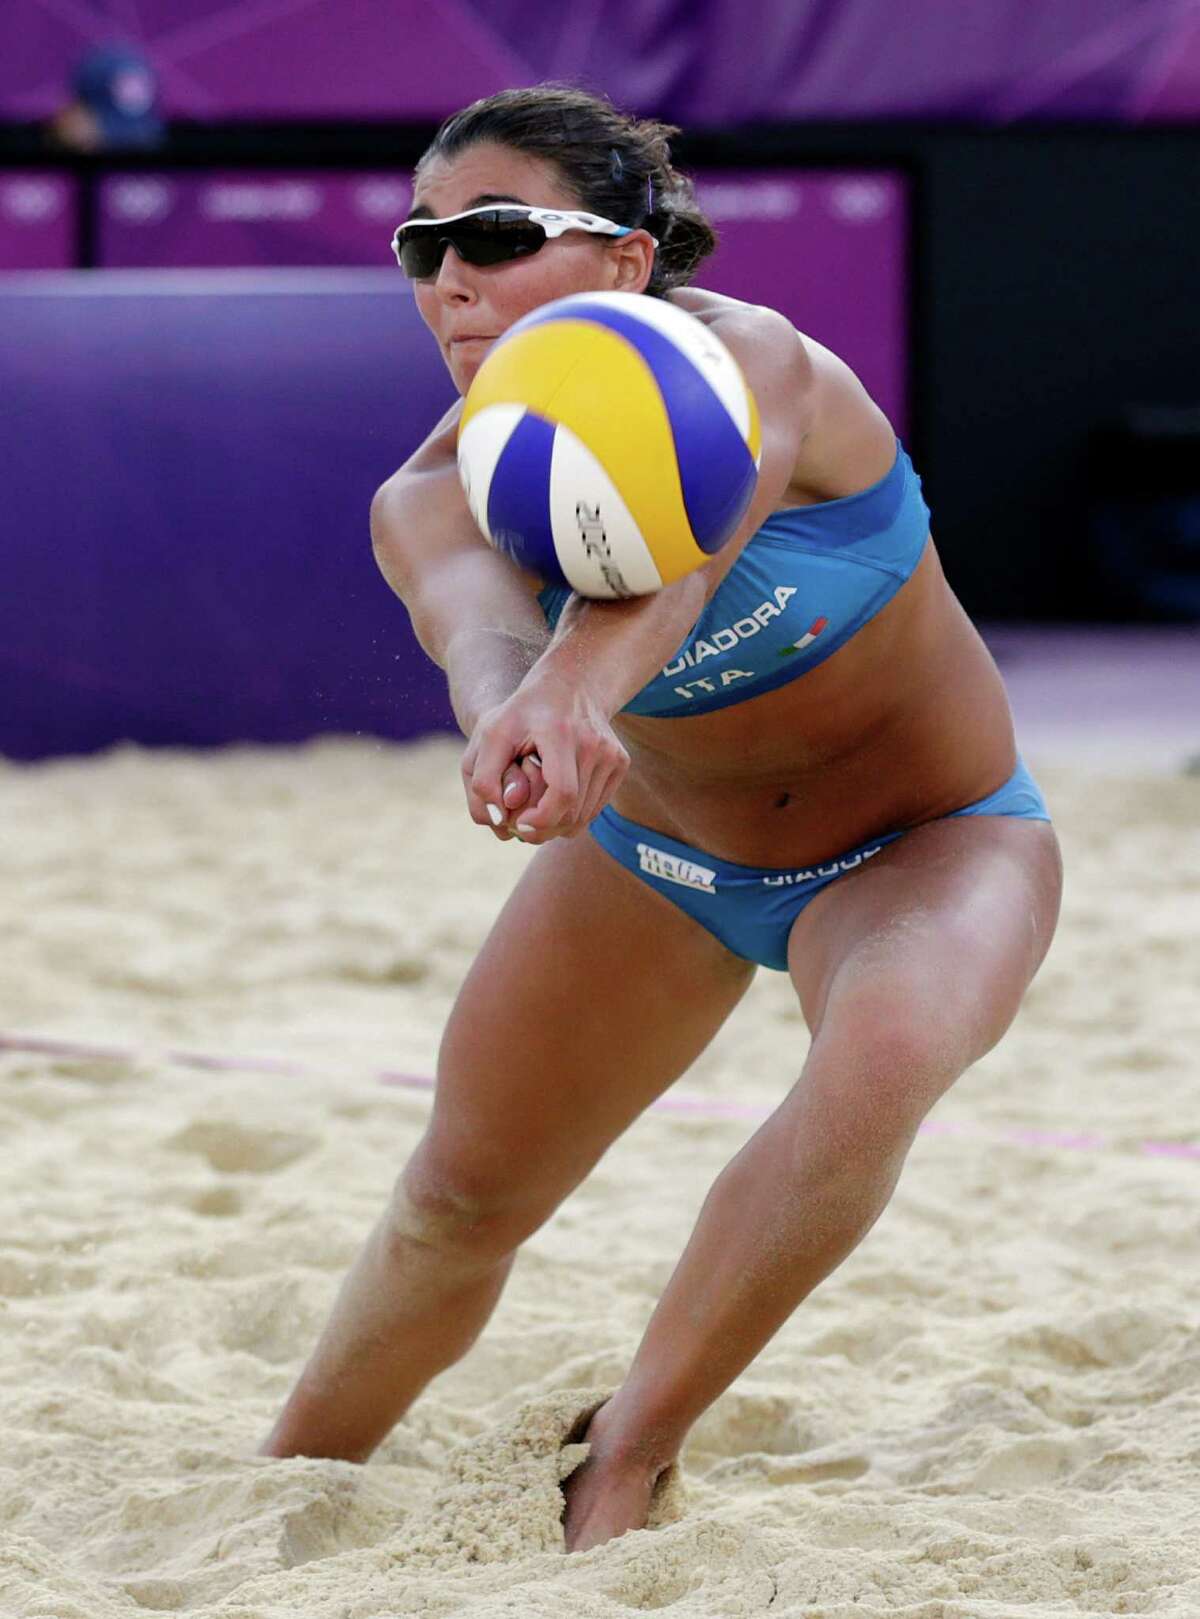 Marta Menegatti of Italy returns the ball during a two set loss to the United States during a beach volleyball match at the 2012 Summer Olympics, Sunday, Aug. 5, 2012, in London. (AP Photo/Dave Martin)